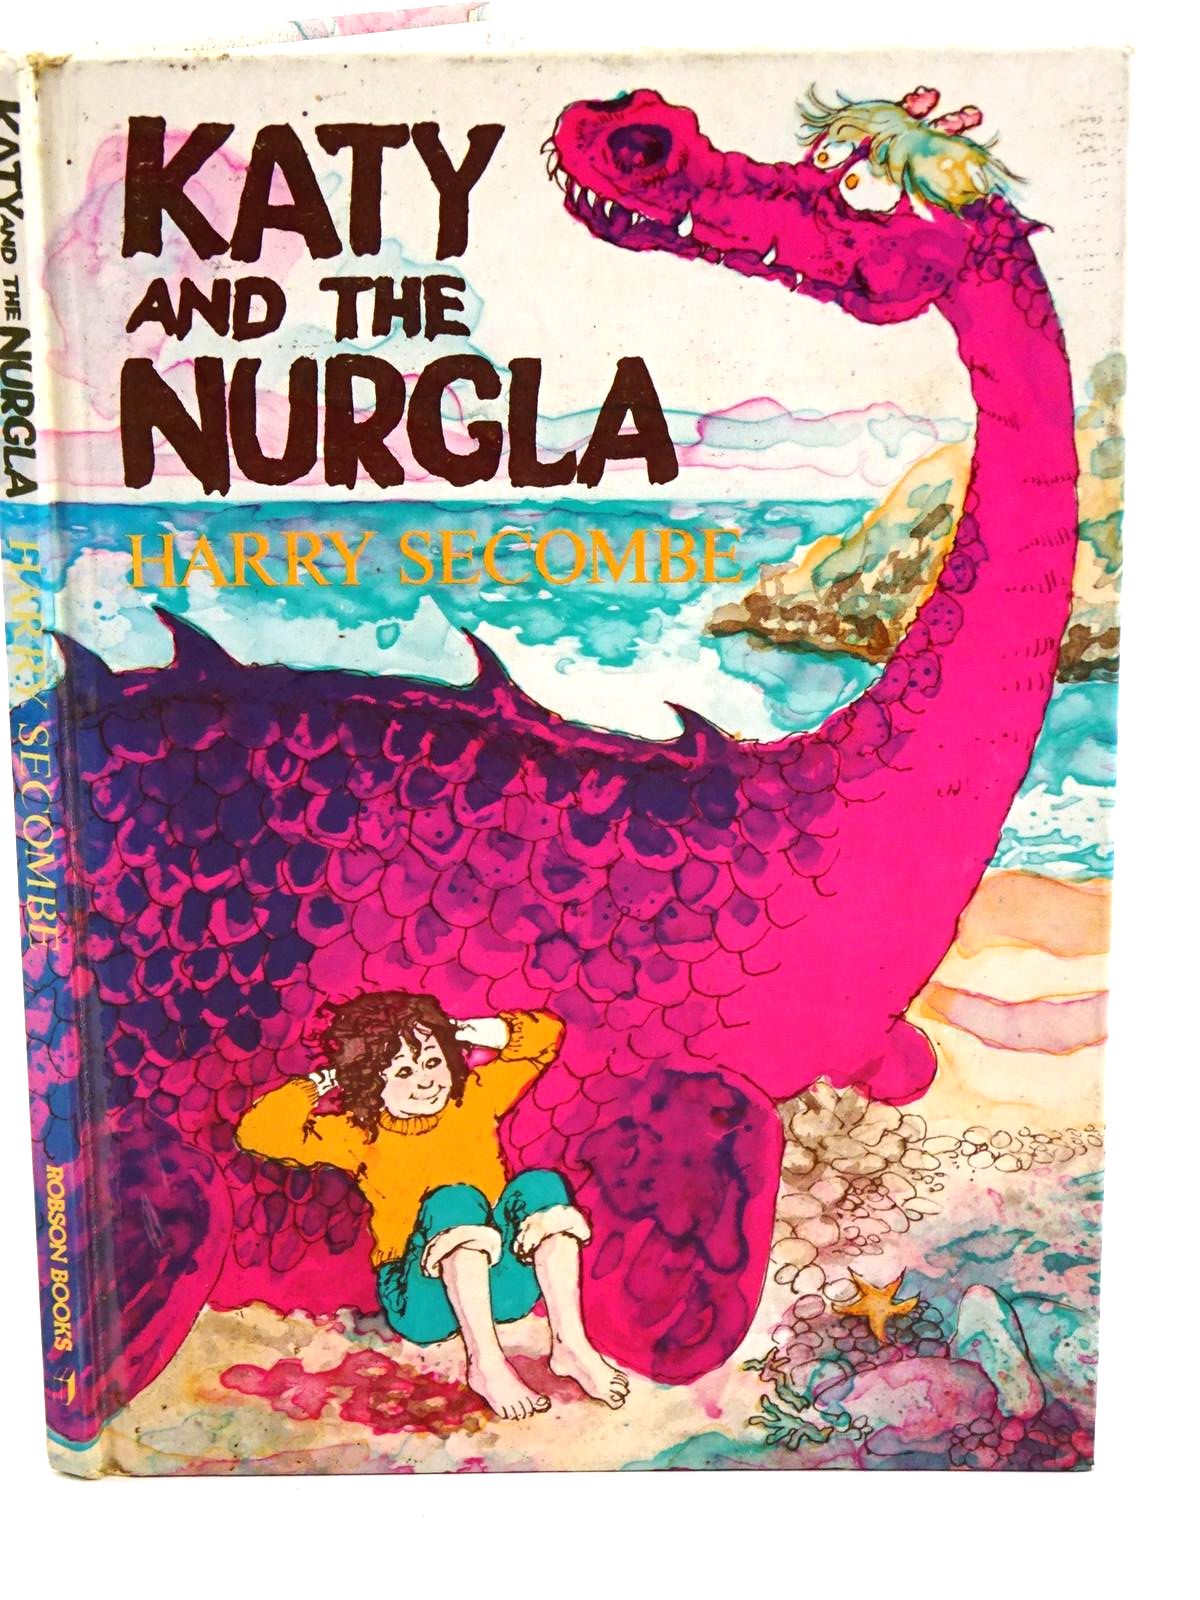 Photo of KATY AND THE NURGLA written by Secombe, Harry illustrated by Lamont, Priscilla published by Robson Books (STOCK CODE: 1318211)  for sale by Stella & Rose's Books